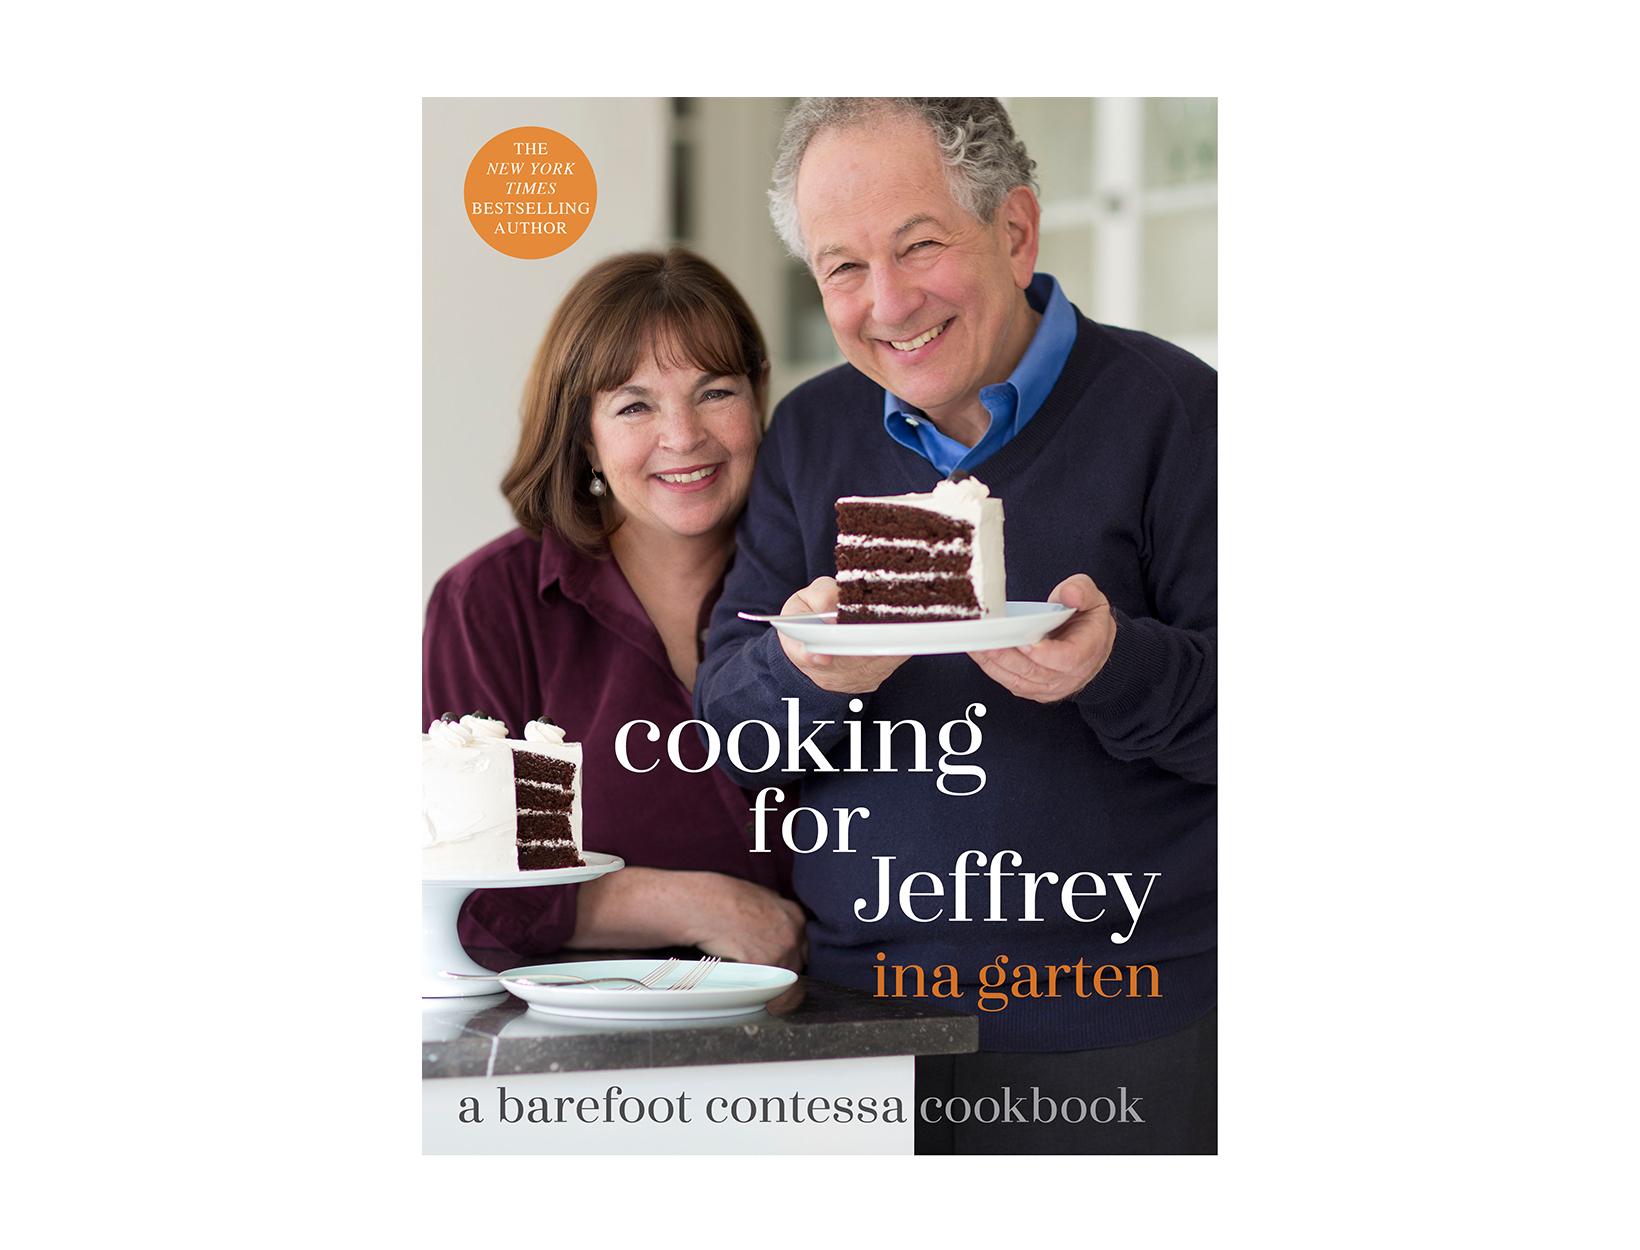 Cooking for Jeffrey by Ina Garten